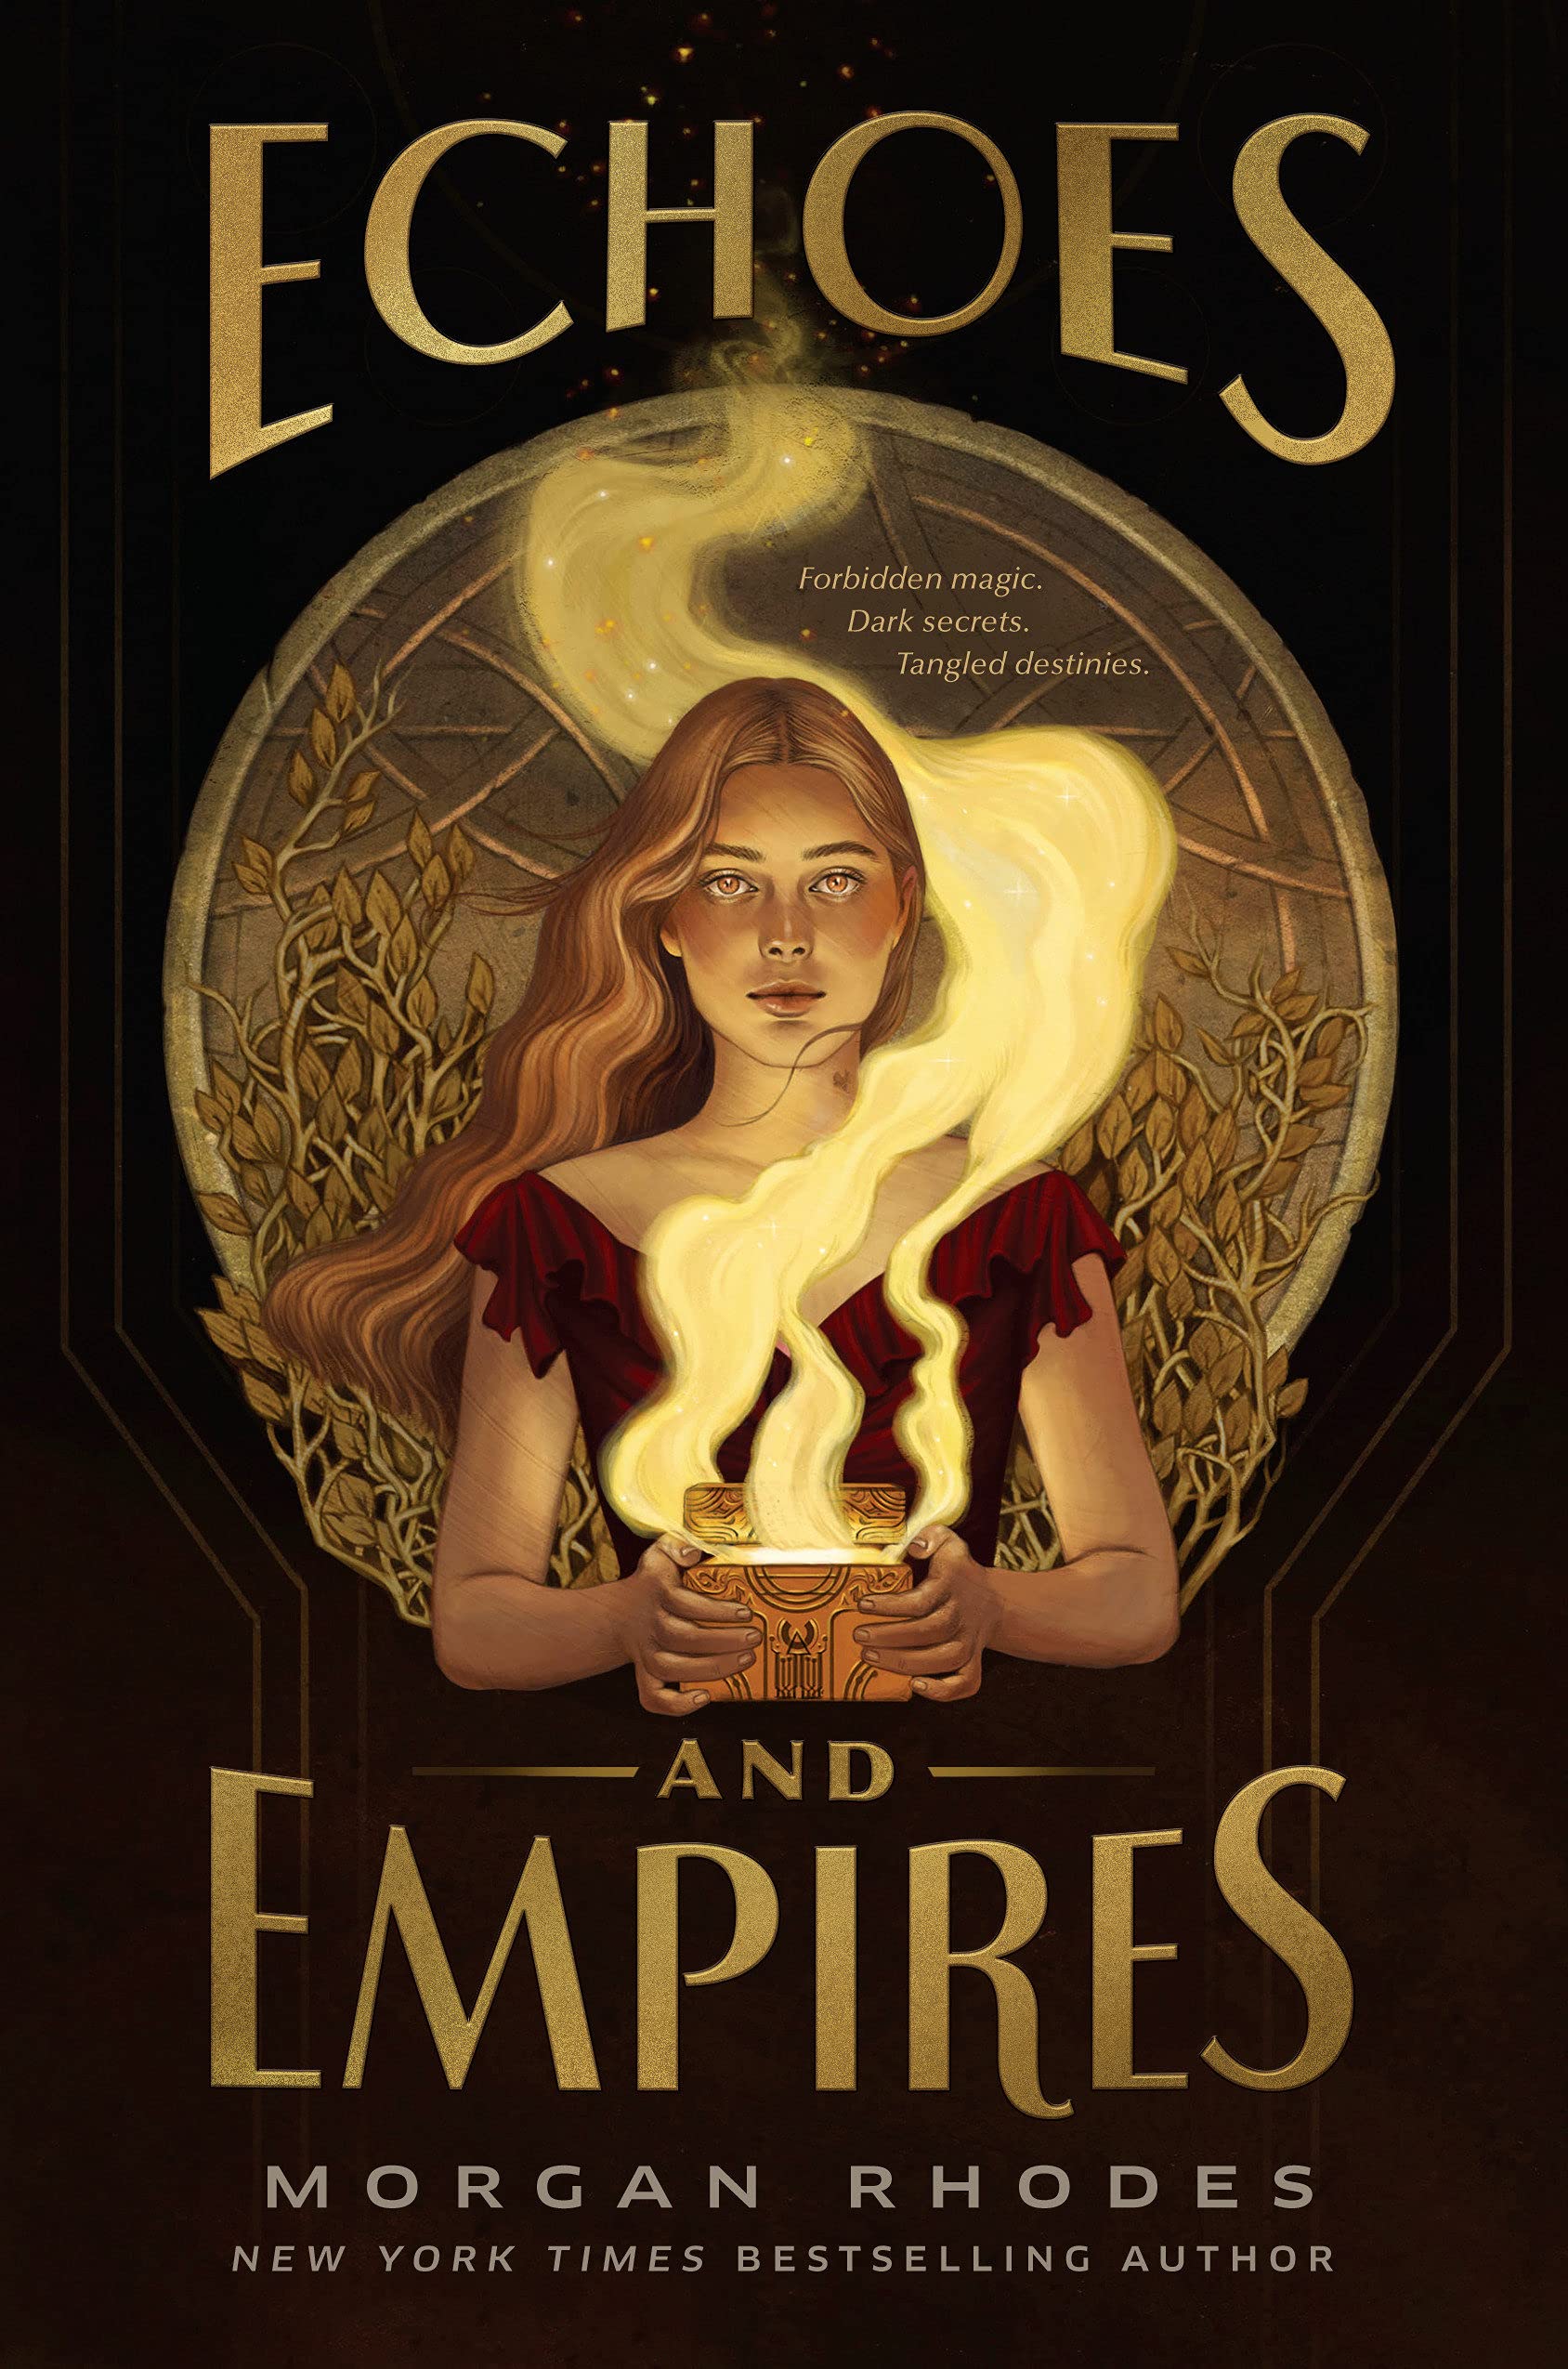 Echoes and Empires #1 by Morgan Rhodes PDF Download